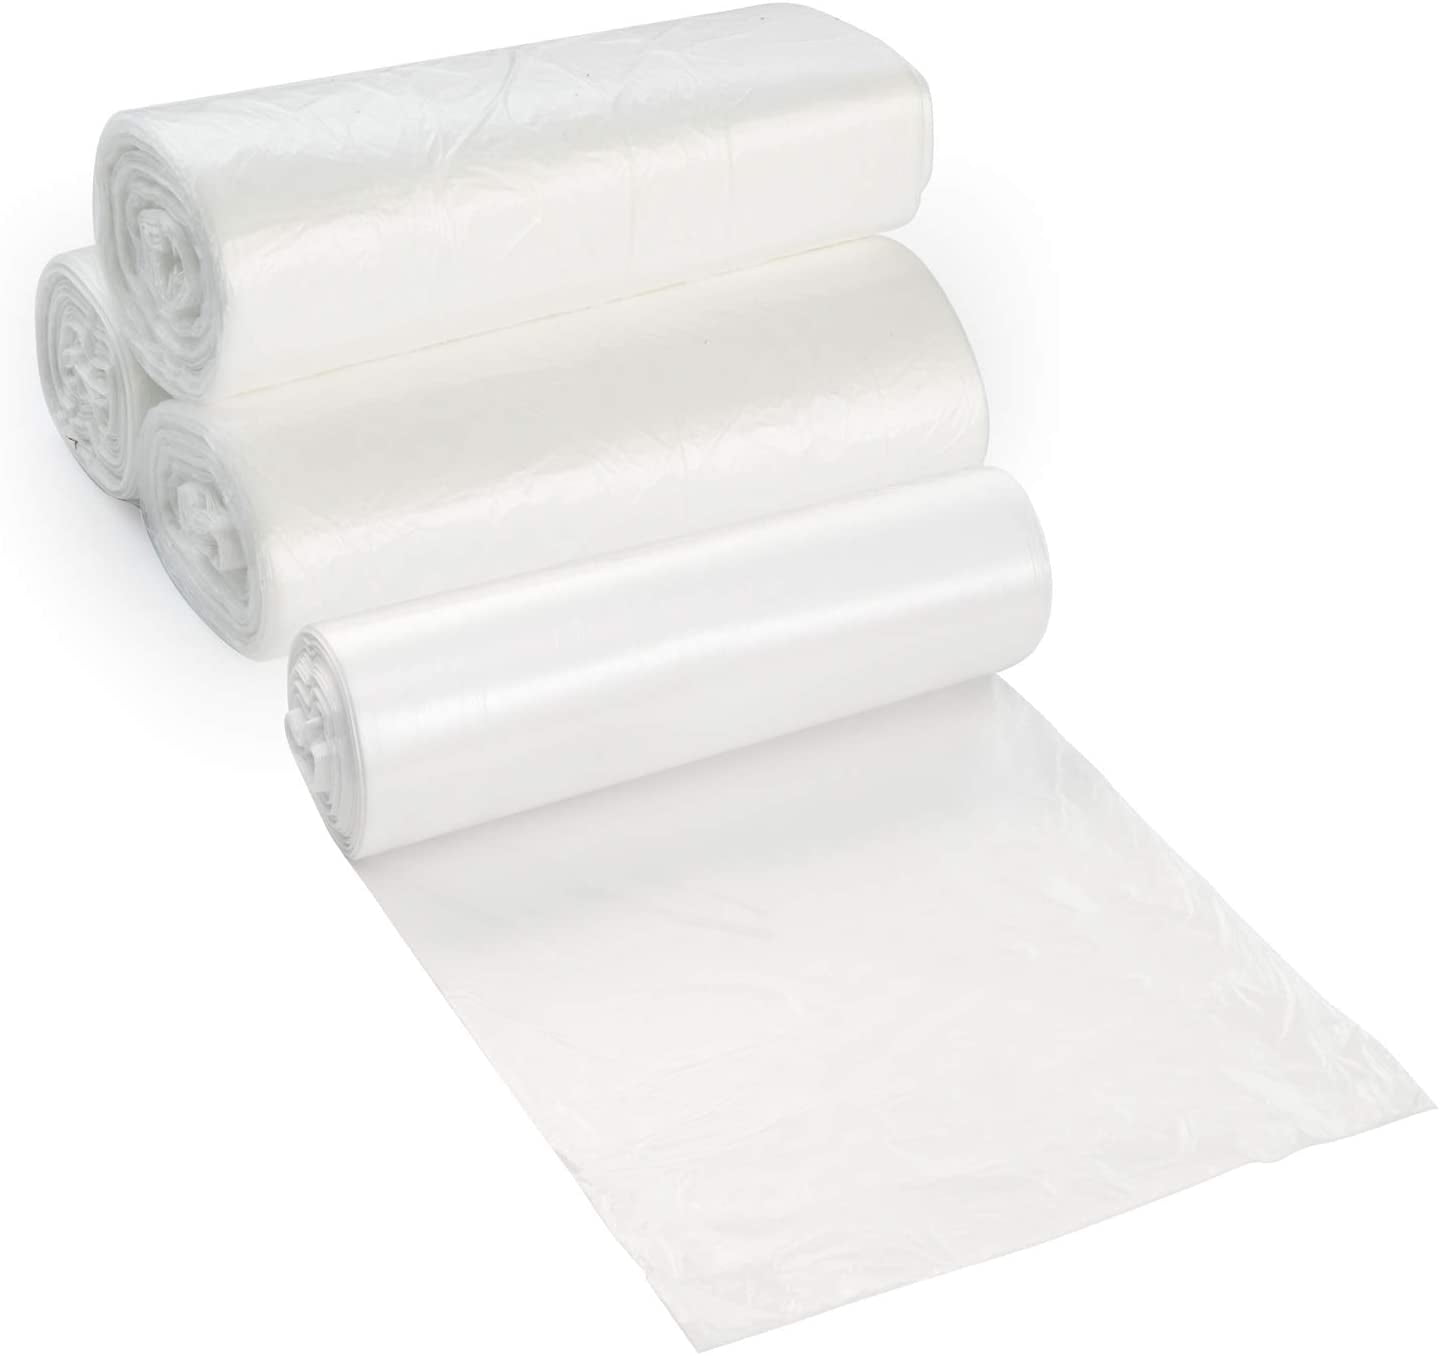 20 Gallon Trash Bags 20 Gal Garbage Bags Can Liners - 30 x 37 10 Micron  CLEAR 500ct